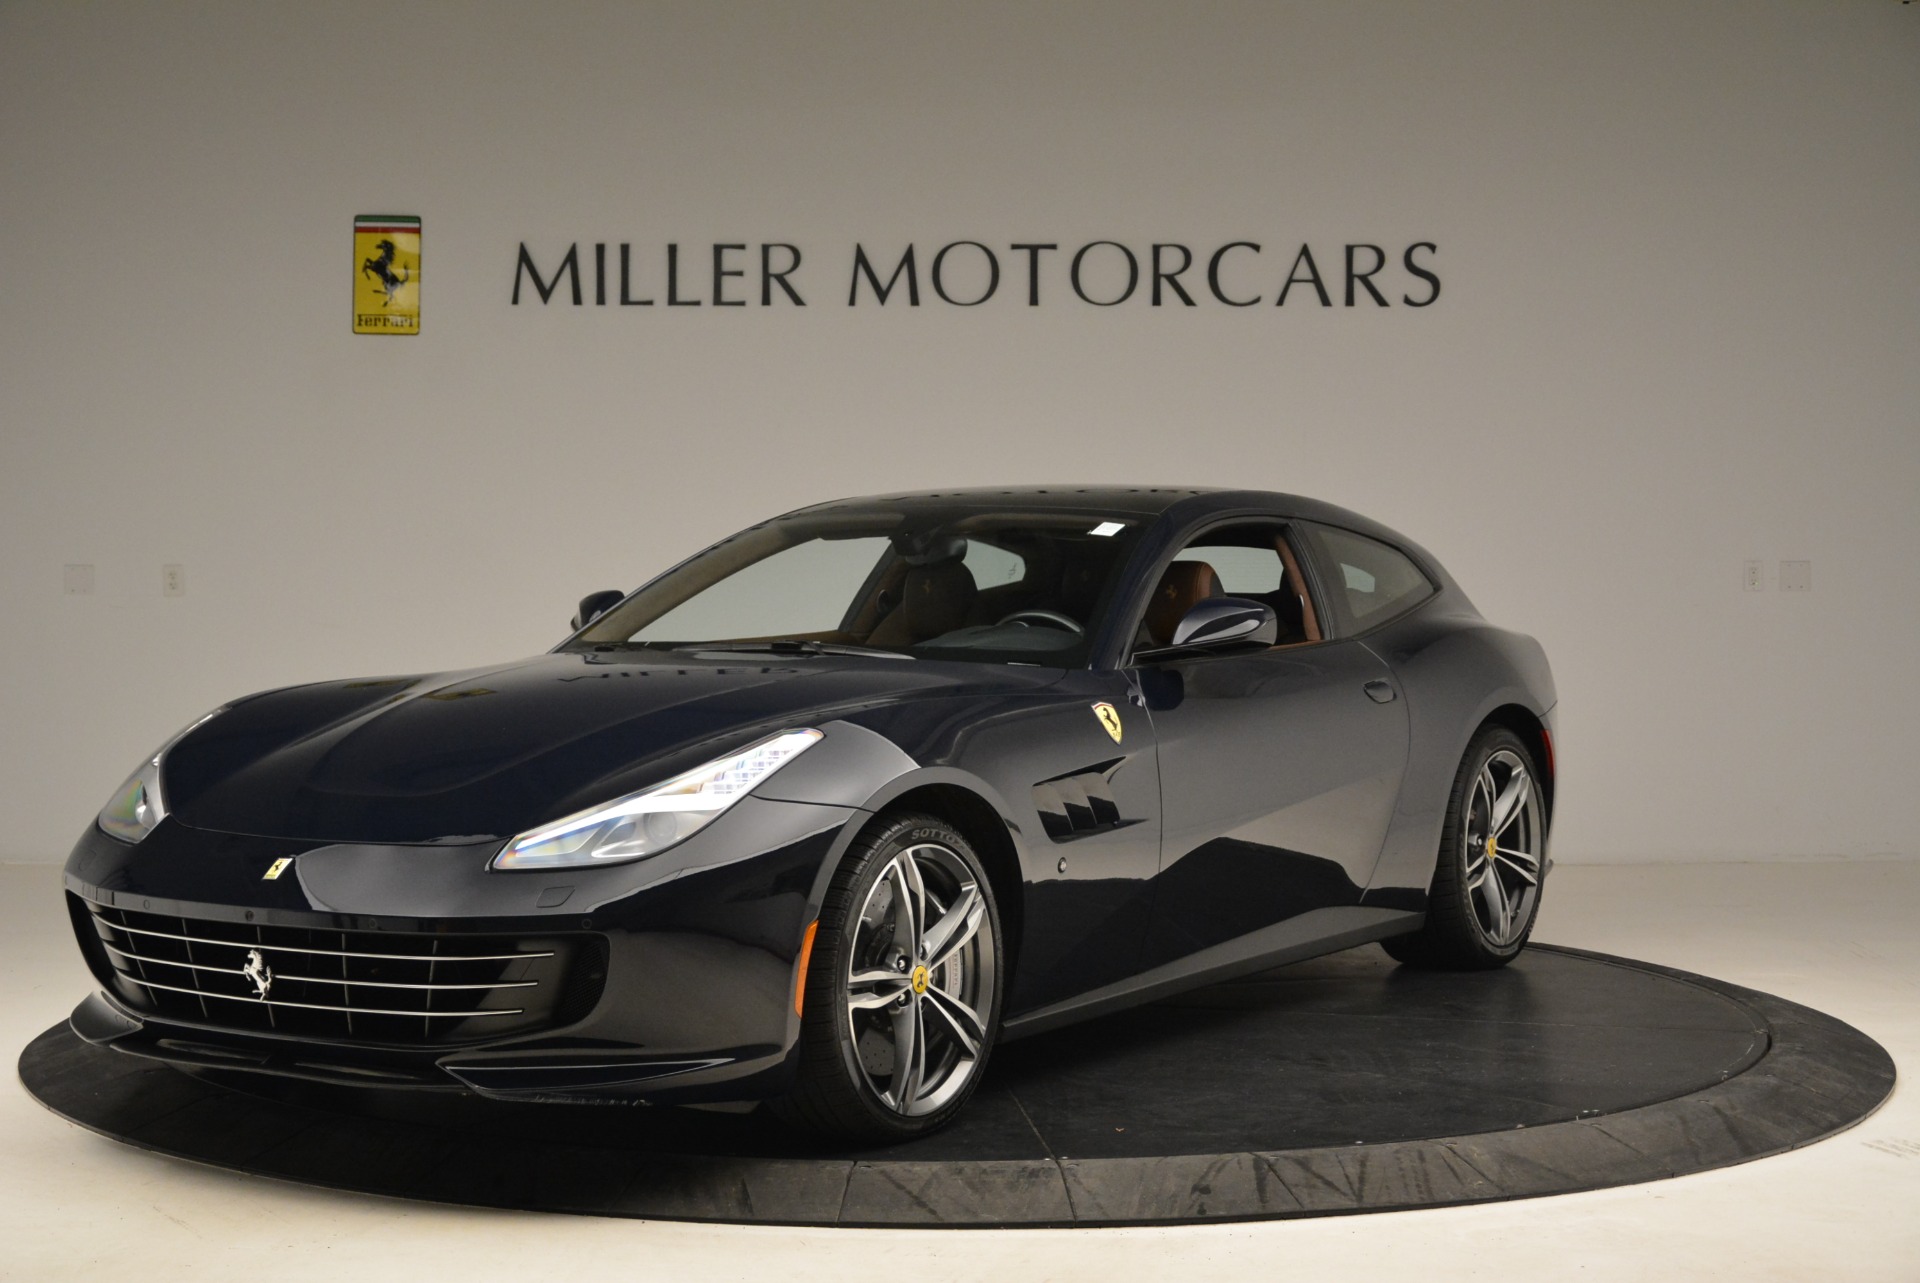 Used 2017 Ferrari GTC4Lusso for sale Sold at Alfa Romeo of Greenwich in Greenwich CT 06830 1